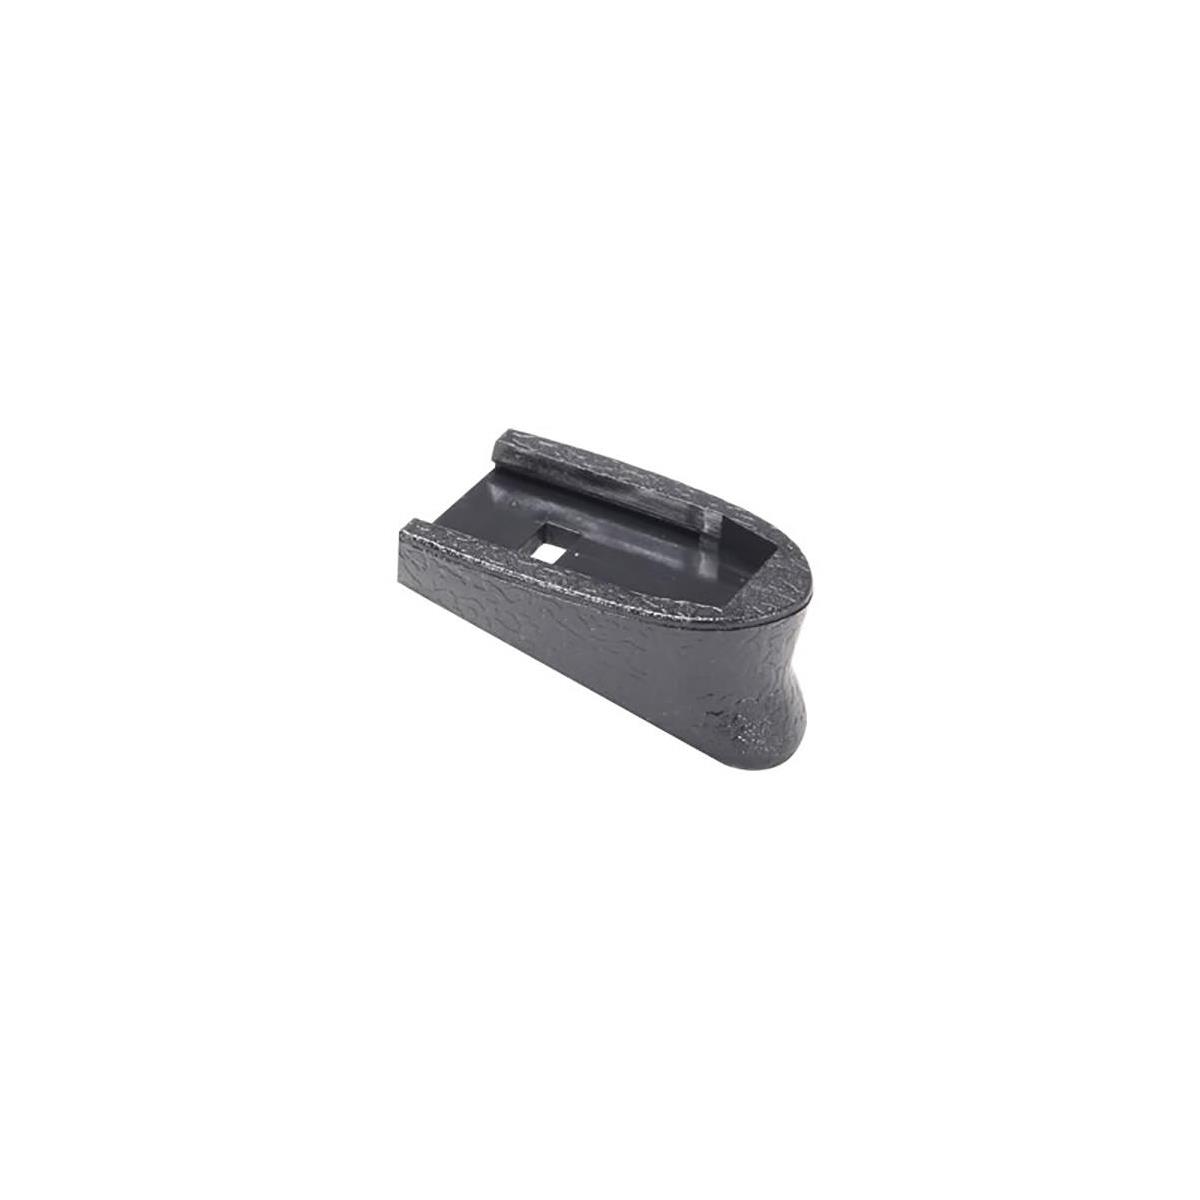 

Lyman Grip Extender for Smith & Wesson Shield Pistol